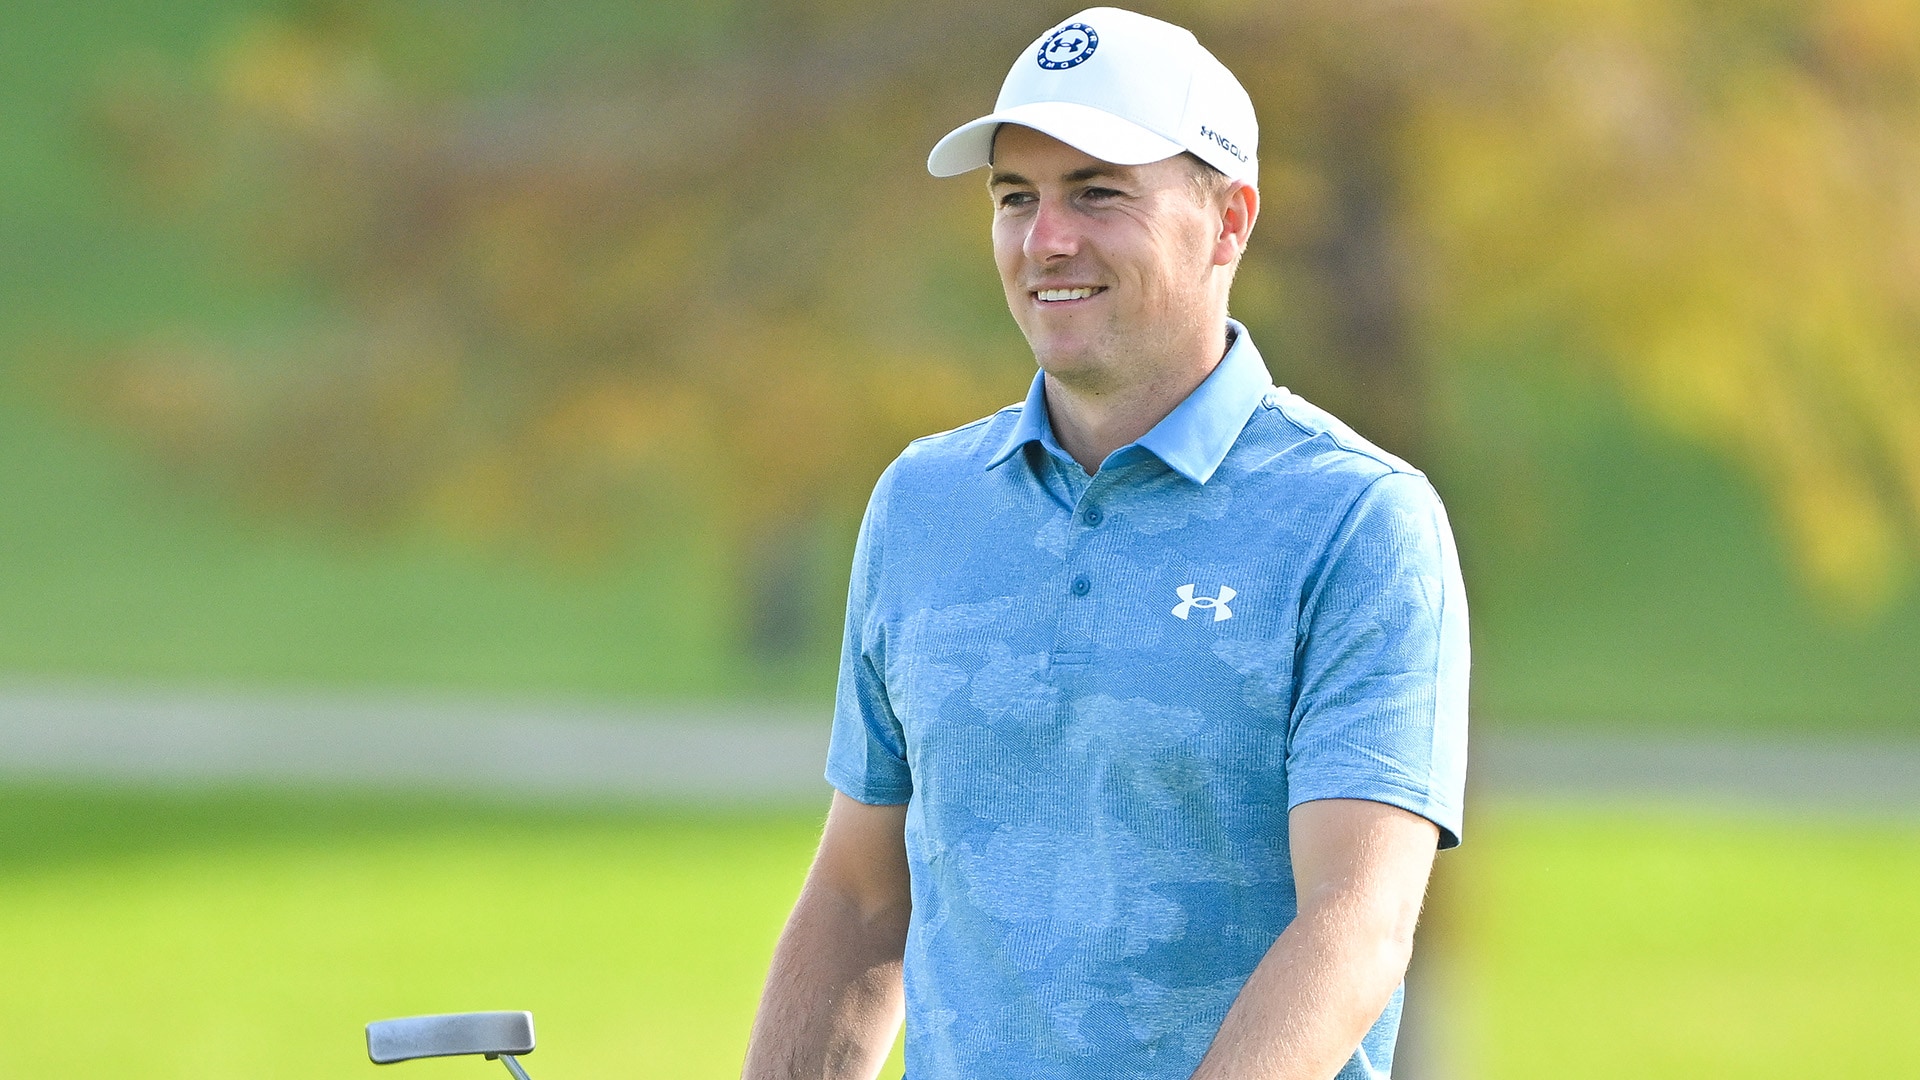 Jordan Spieth kindly asks fans to keep their gambling talk down while he’s putting